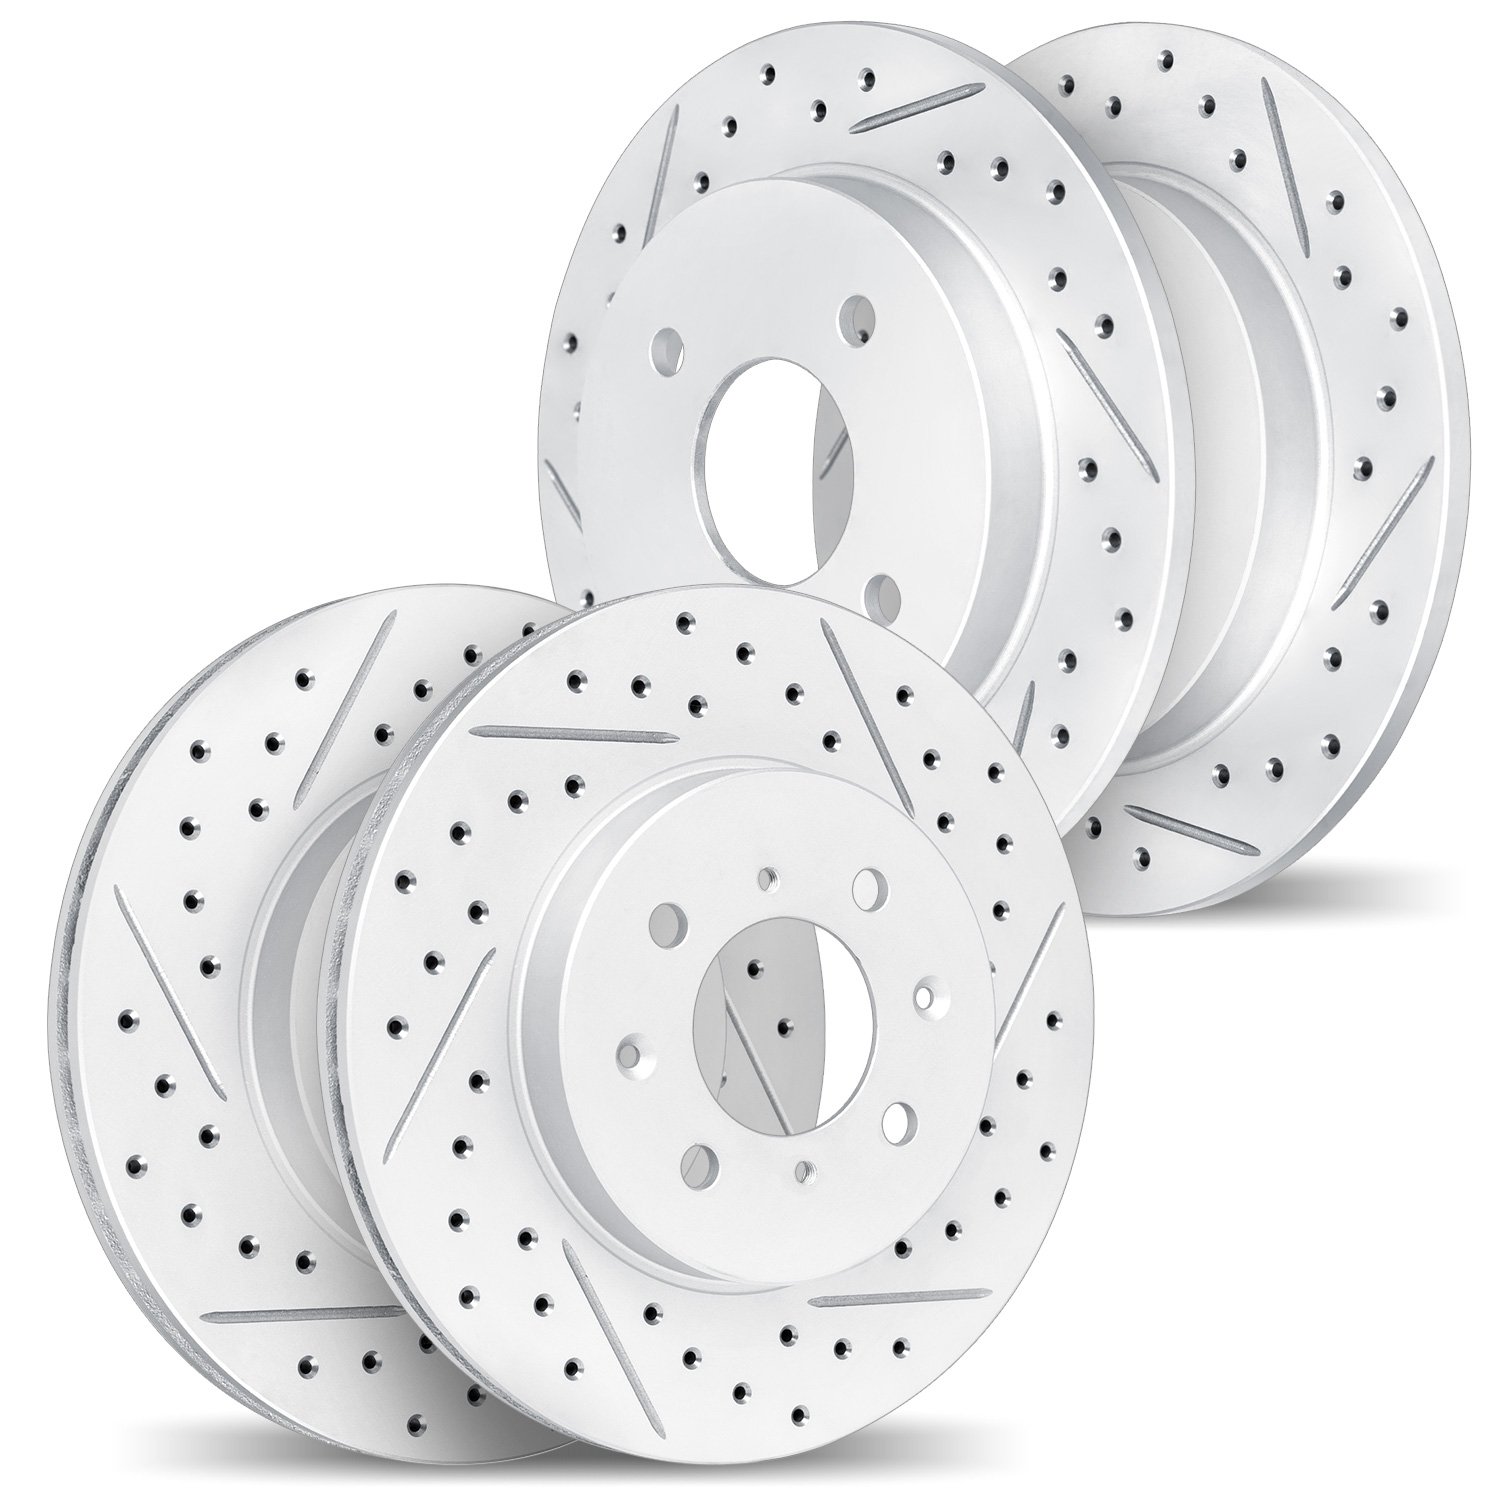 2004-67004 Geoperformance Drilled/Slotted Brake Rotors, 1990-1996 Infiniti/Nissan, Position: Front and Rear